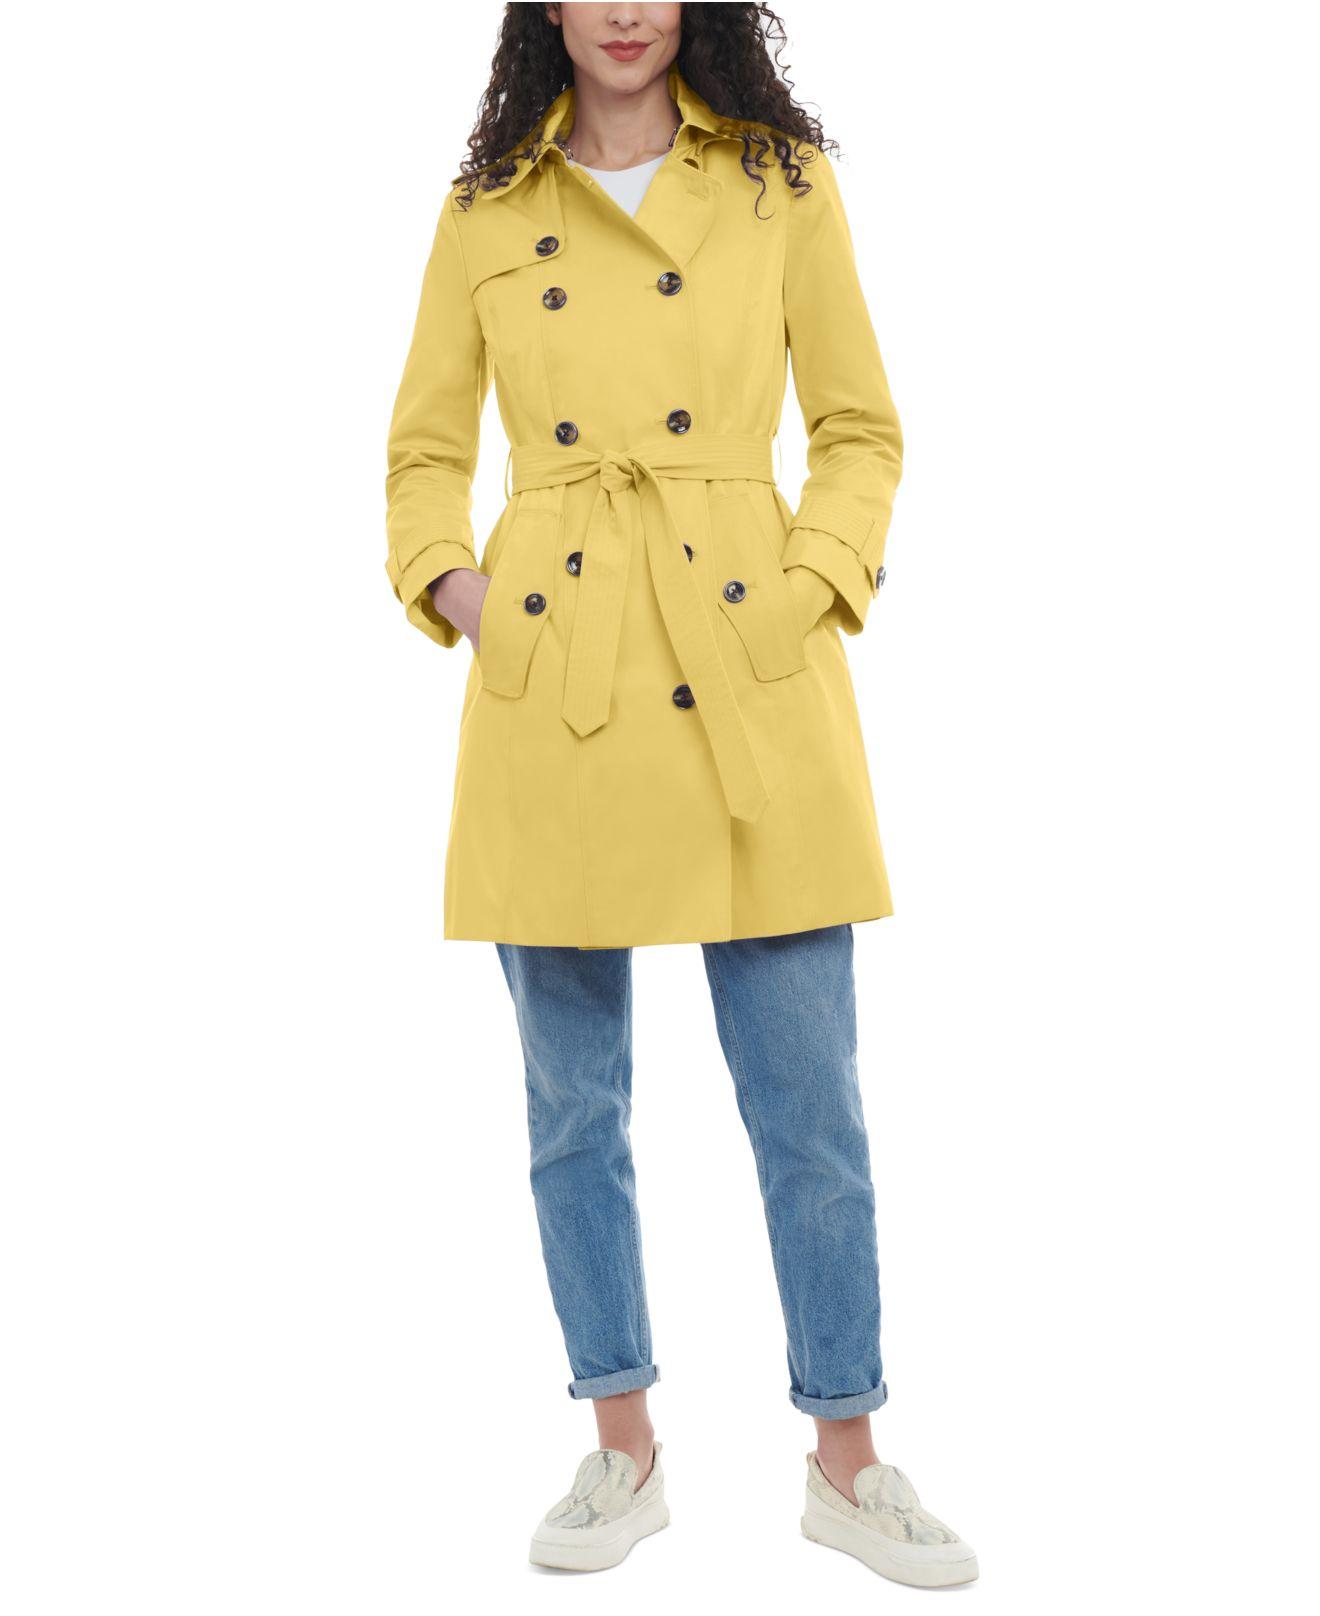 London Fog Petite Hooded Double-breasted Trench Coat in Yellow | Lyst